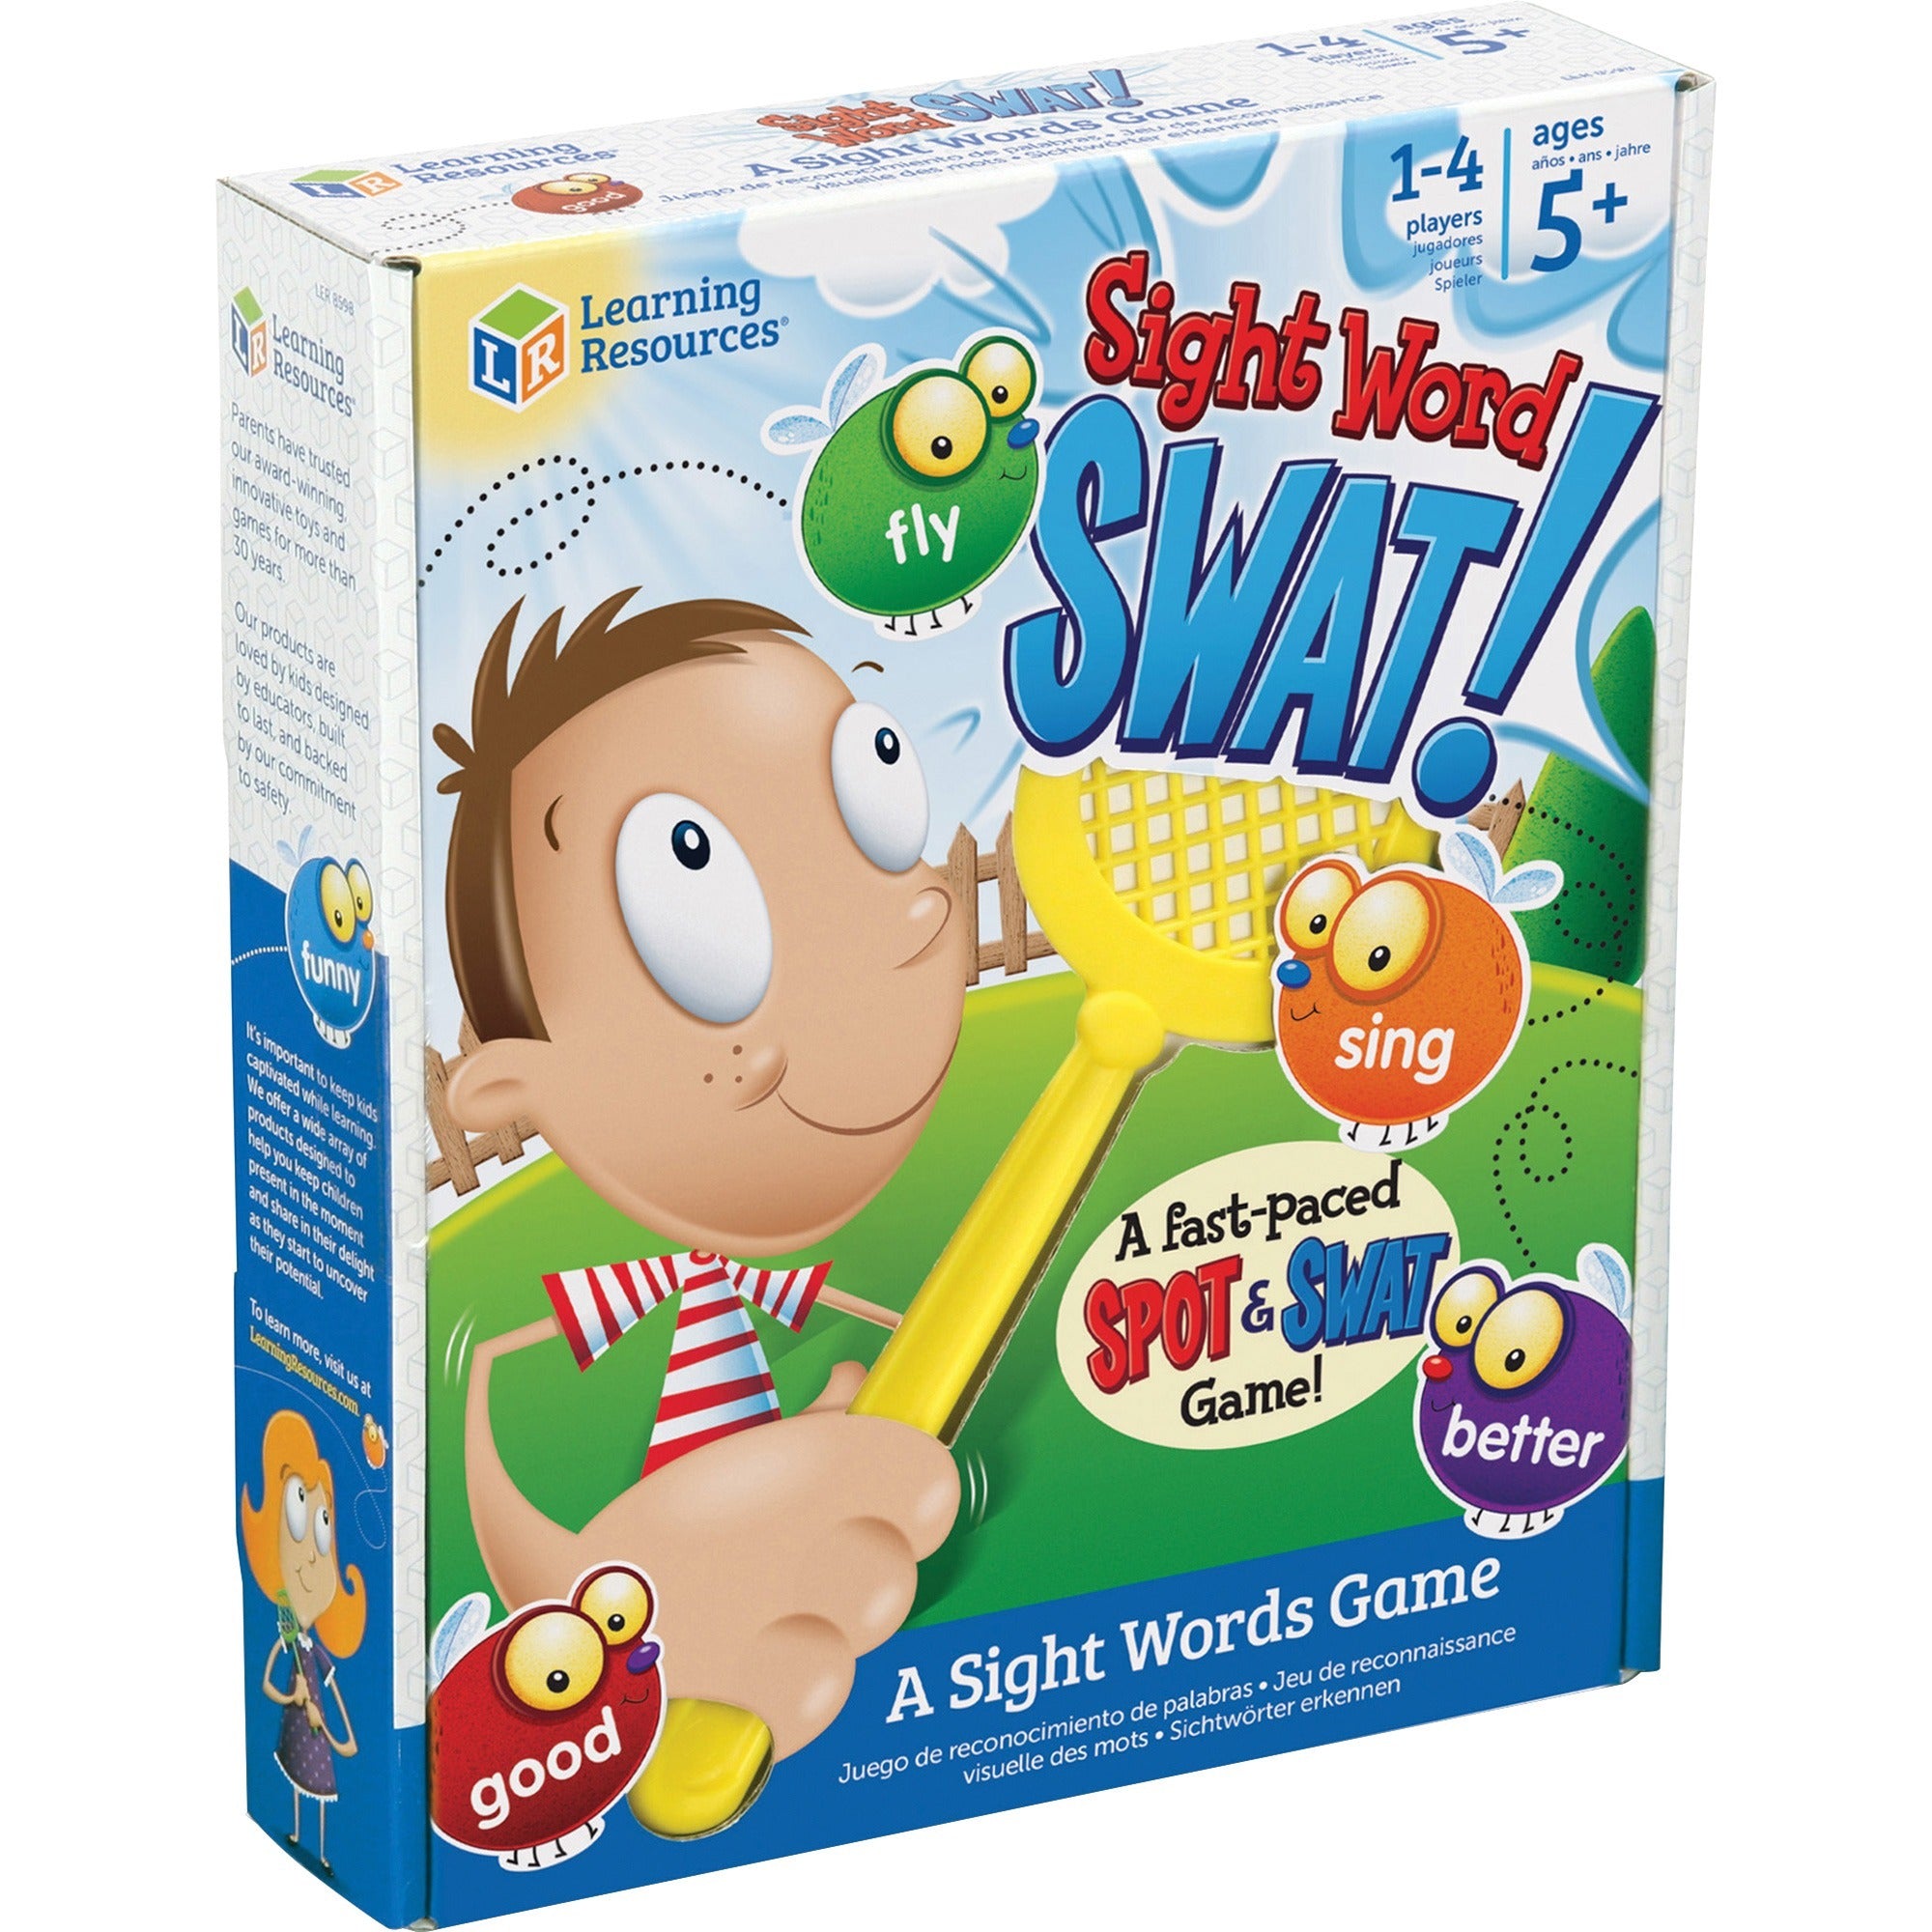 learning-resources-sight-words-swat!-a-sight-words-game-learning_lrnler8598 - 1